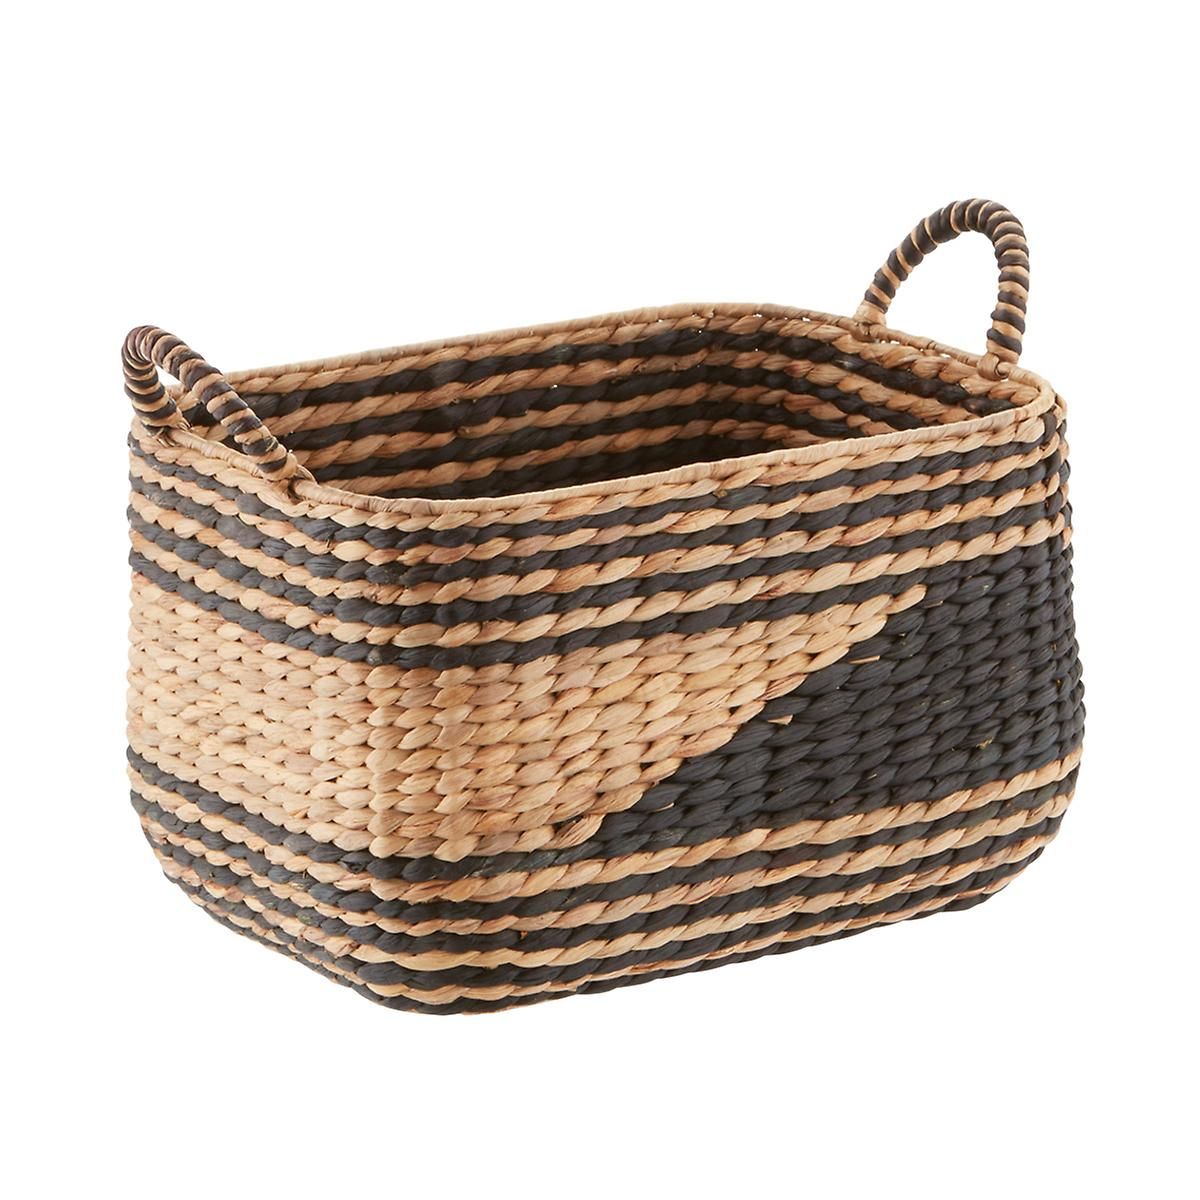 Medium Water Hyacinth Basket w/Handle Natural/Black | The Container Store